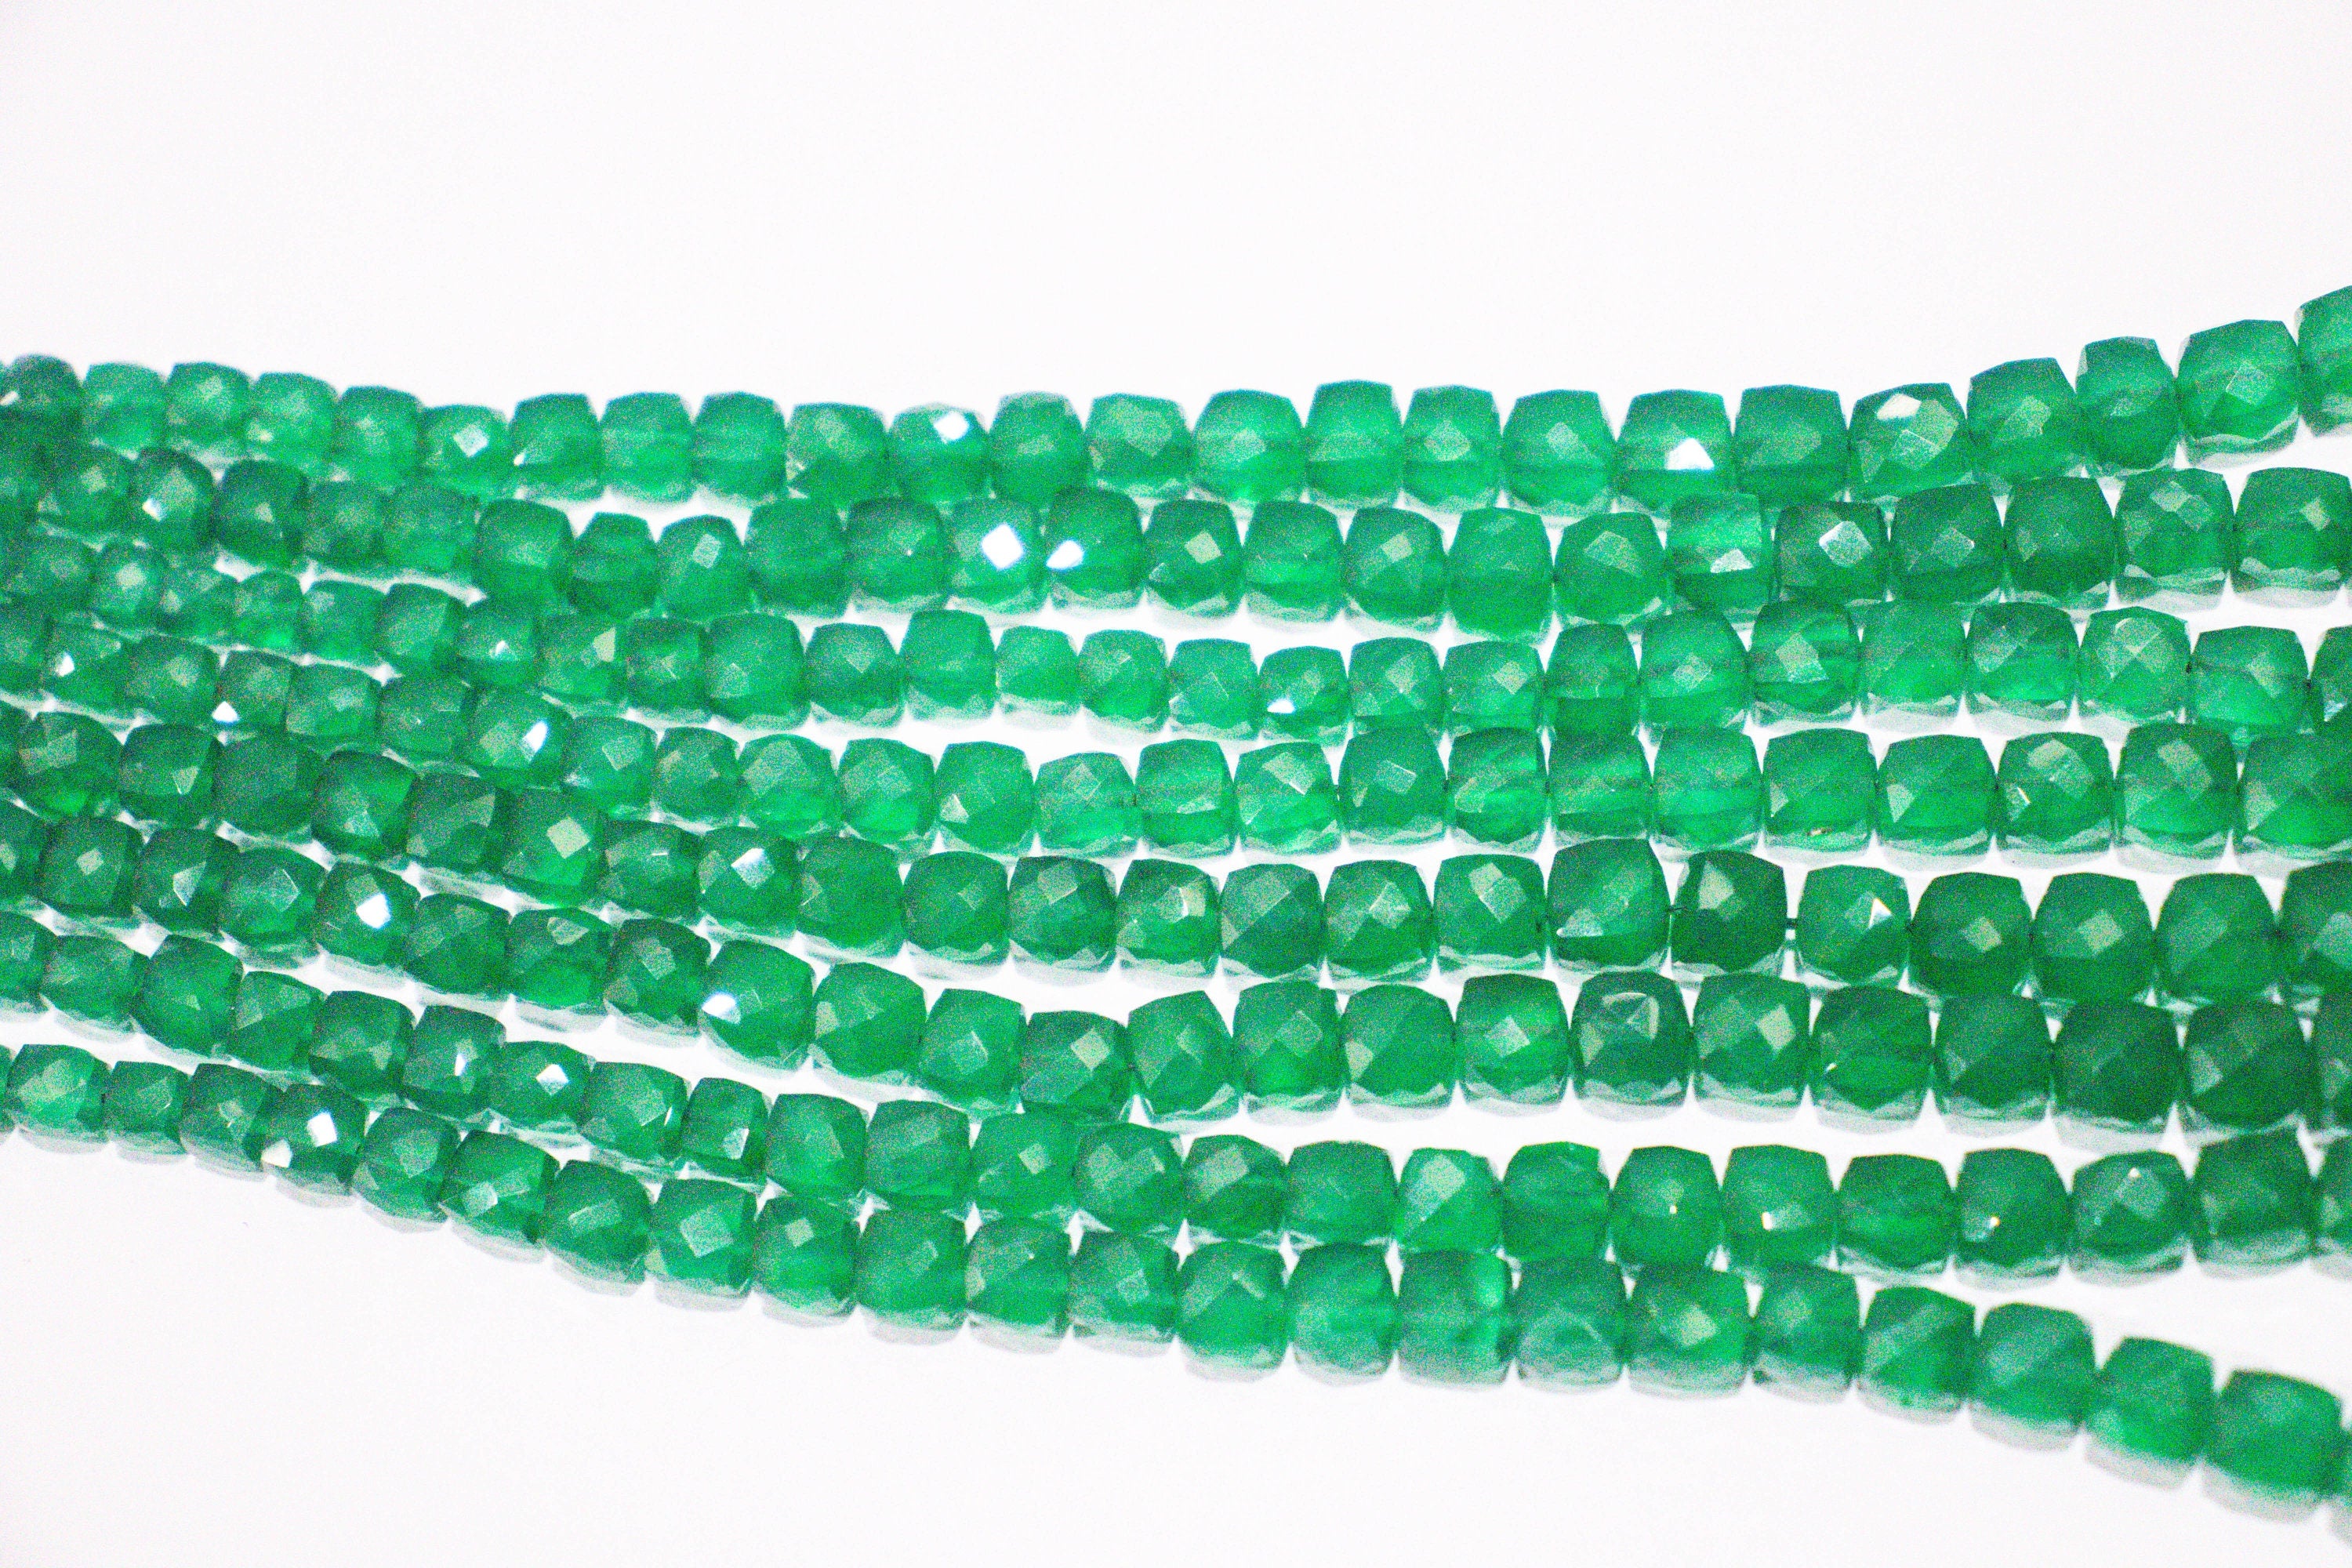 Green onyx Cube Beads 4 to 6mm Size AAA+ Quality Faceted Box Shape Beads Length 18 inches long Cube Gemstone Beads  Wholesale Beads - Beadsforyourjewelry